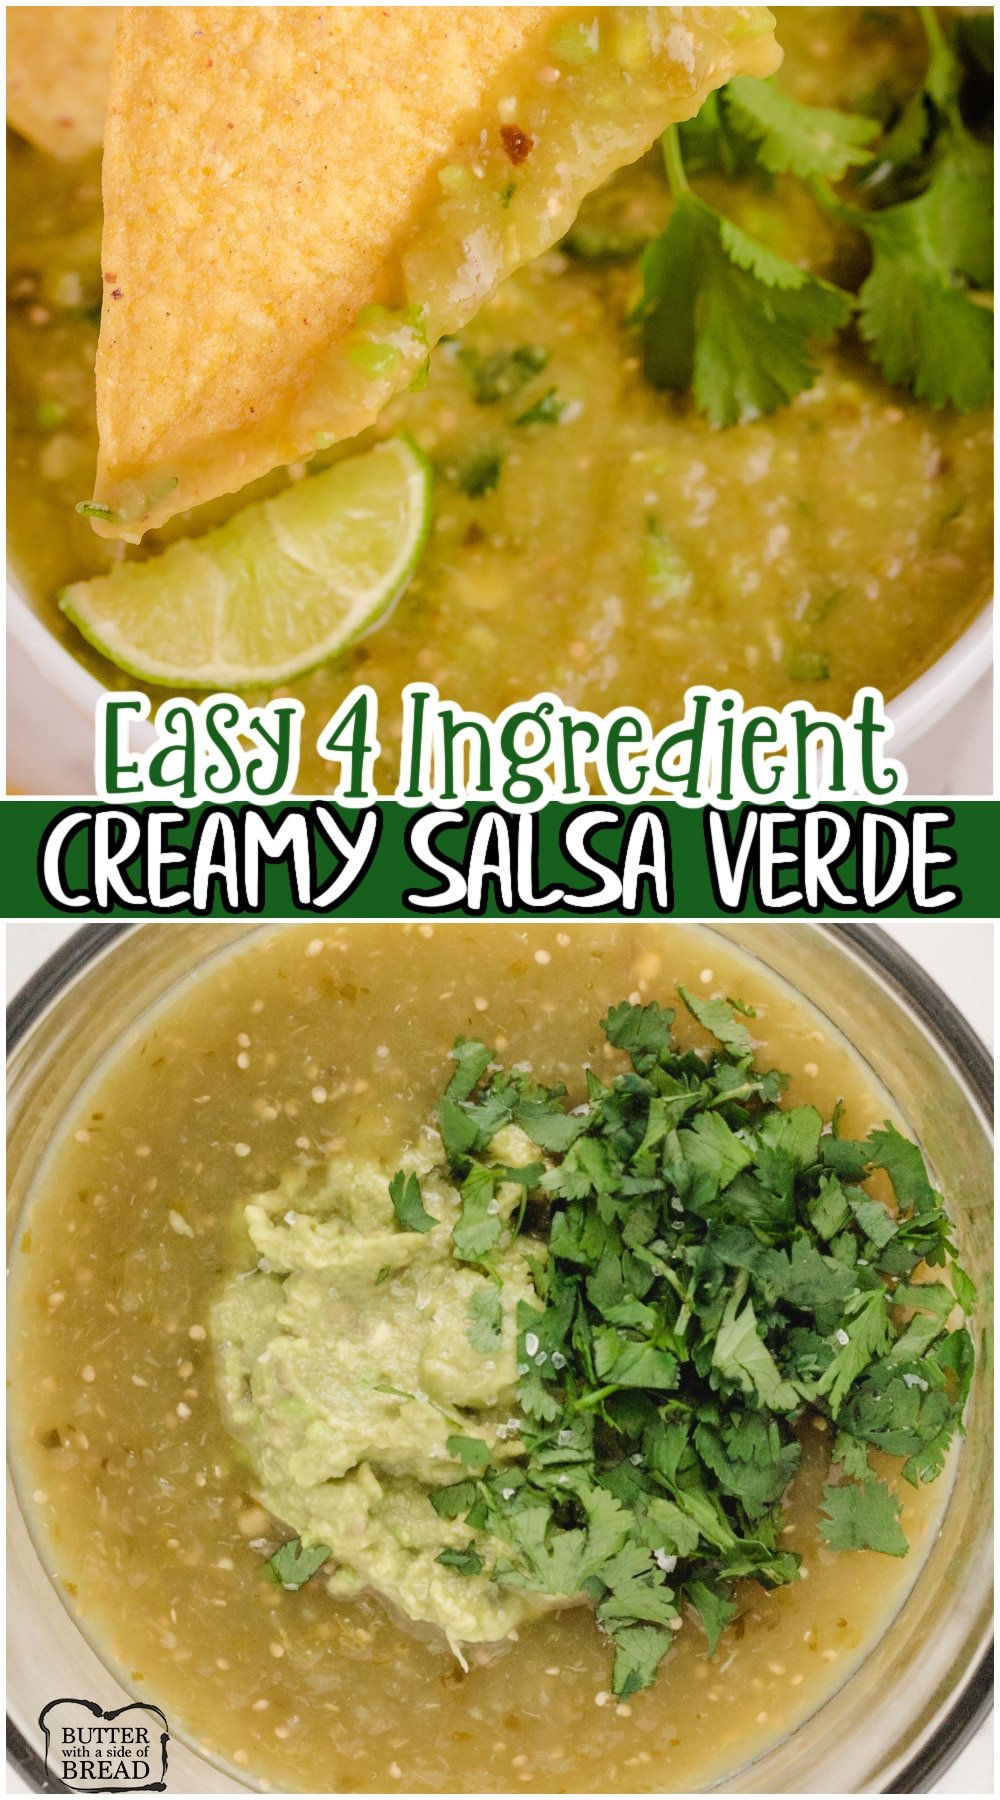 Creamy Salsa Verde made with 4 ingredients & is perfect to serve alongside tacos, enchiladas, or just eaten with chips! Creamy, tangy green salsa dip with bright fresh cilantro lime flavors that everyone goes crazy over!